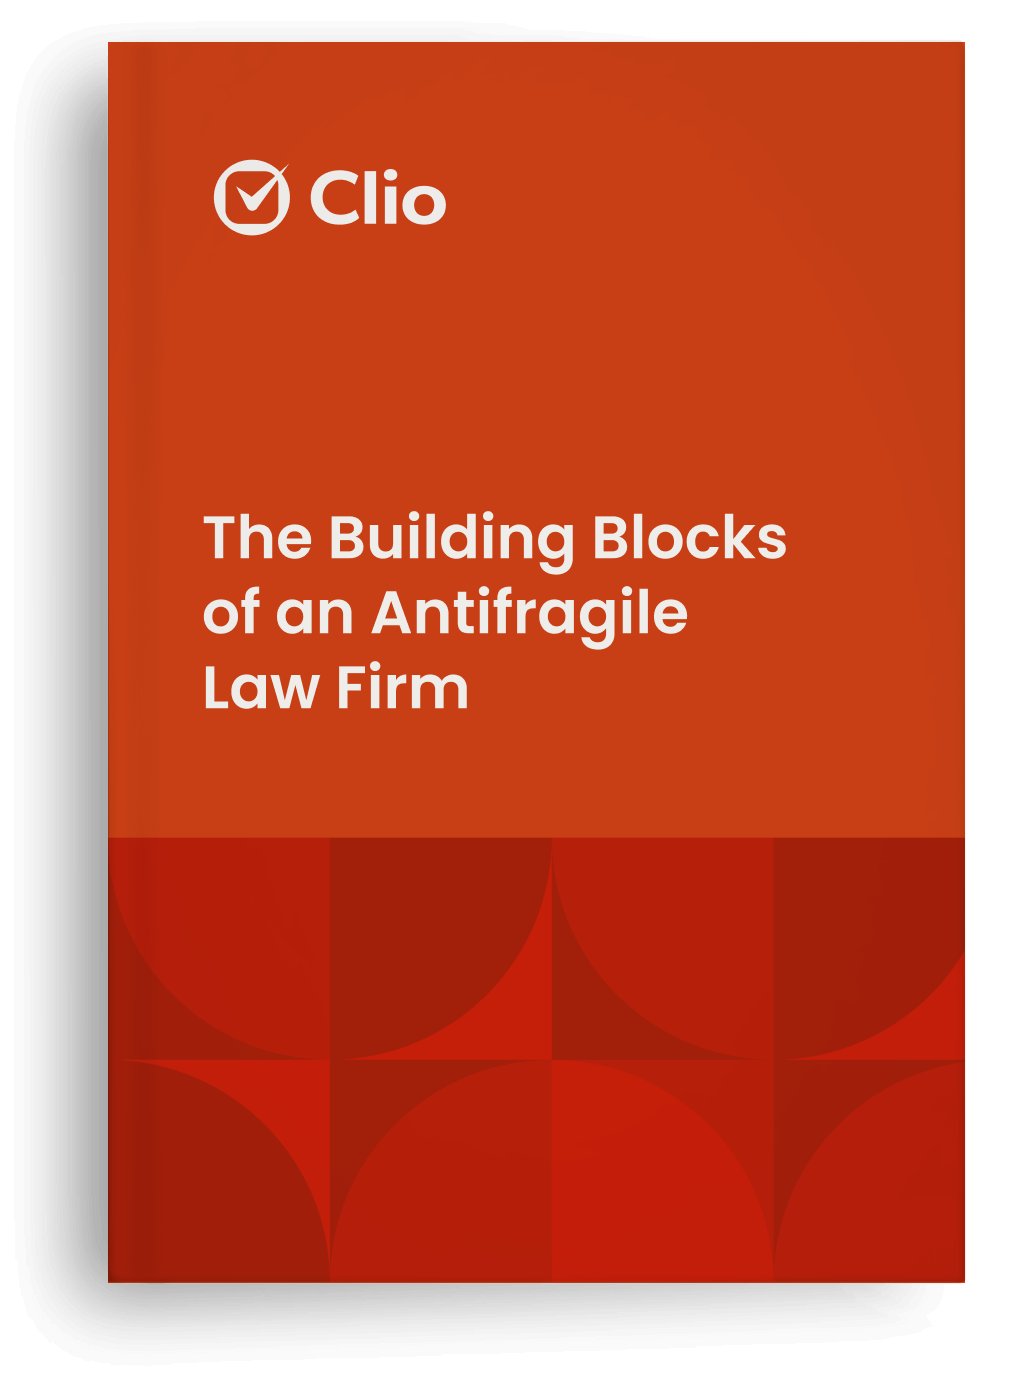 The Building Blocks of an Antifragile Law Firm